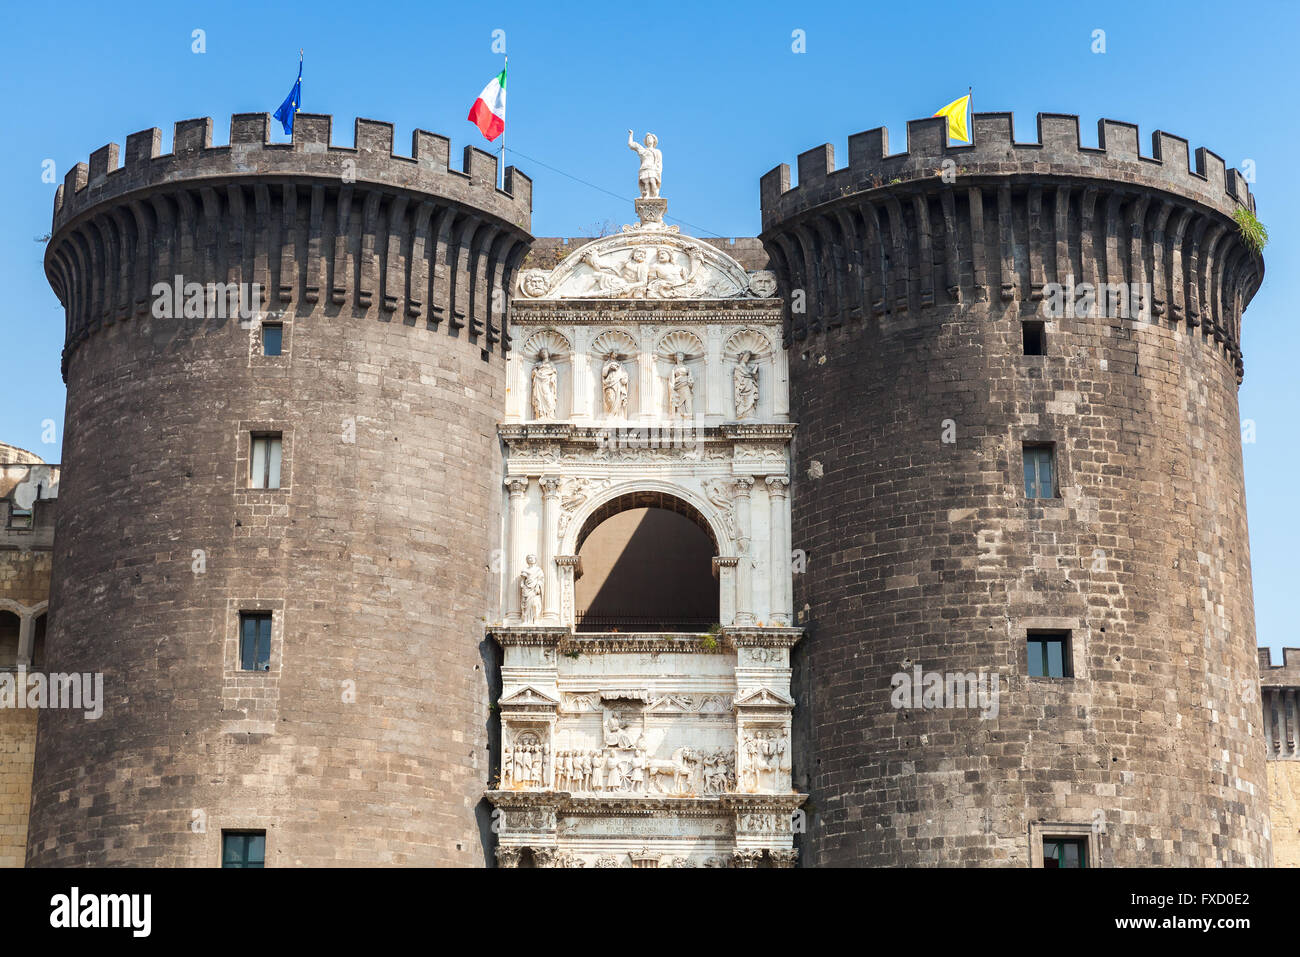 Castel Nouvo. Main facade of medieval castle in Naples, Italy. It was first erected in 1279, now it is one of the main architect Stock Photo